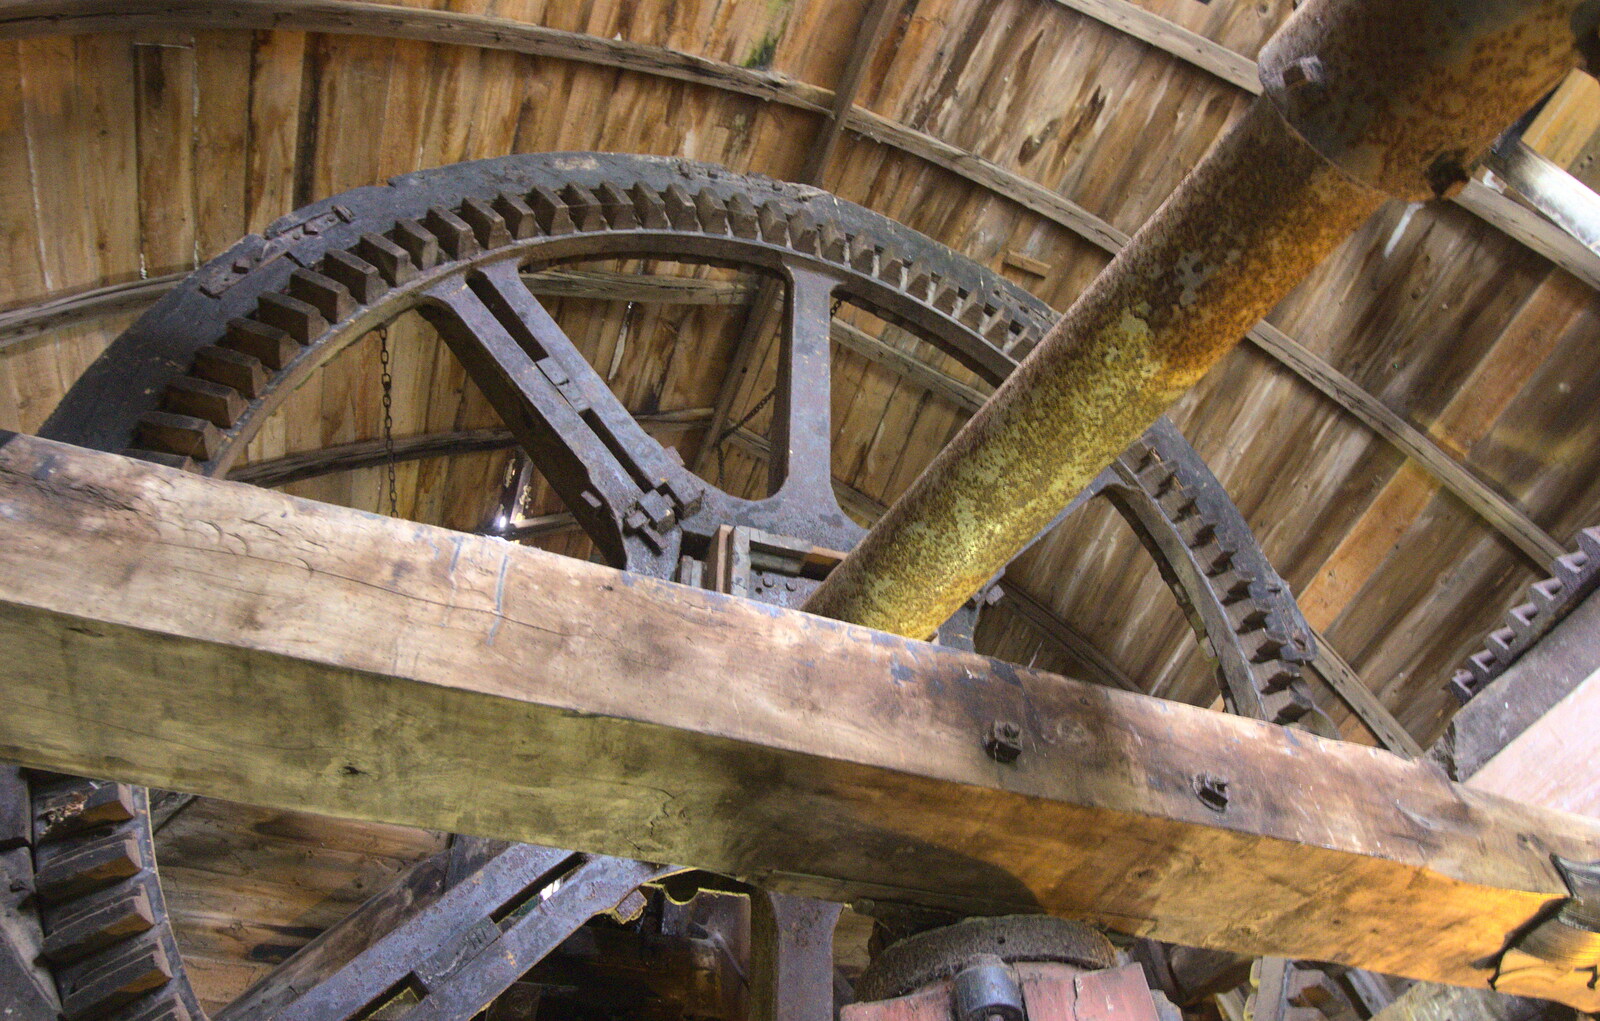 The massive sail gears up in the roof from A Wet Weekend of Camping, Waxham Sands, Norfolk - 13th June 2015